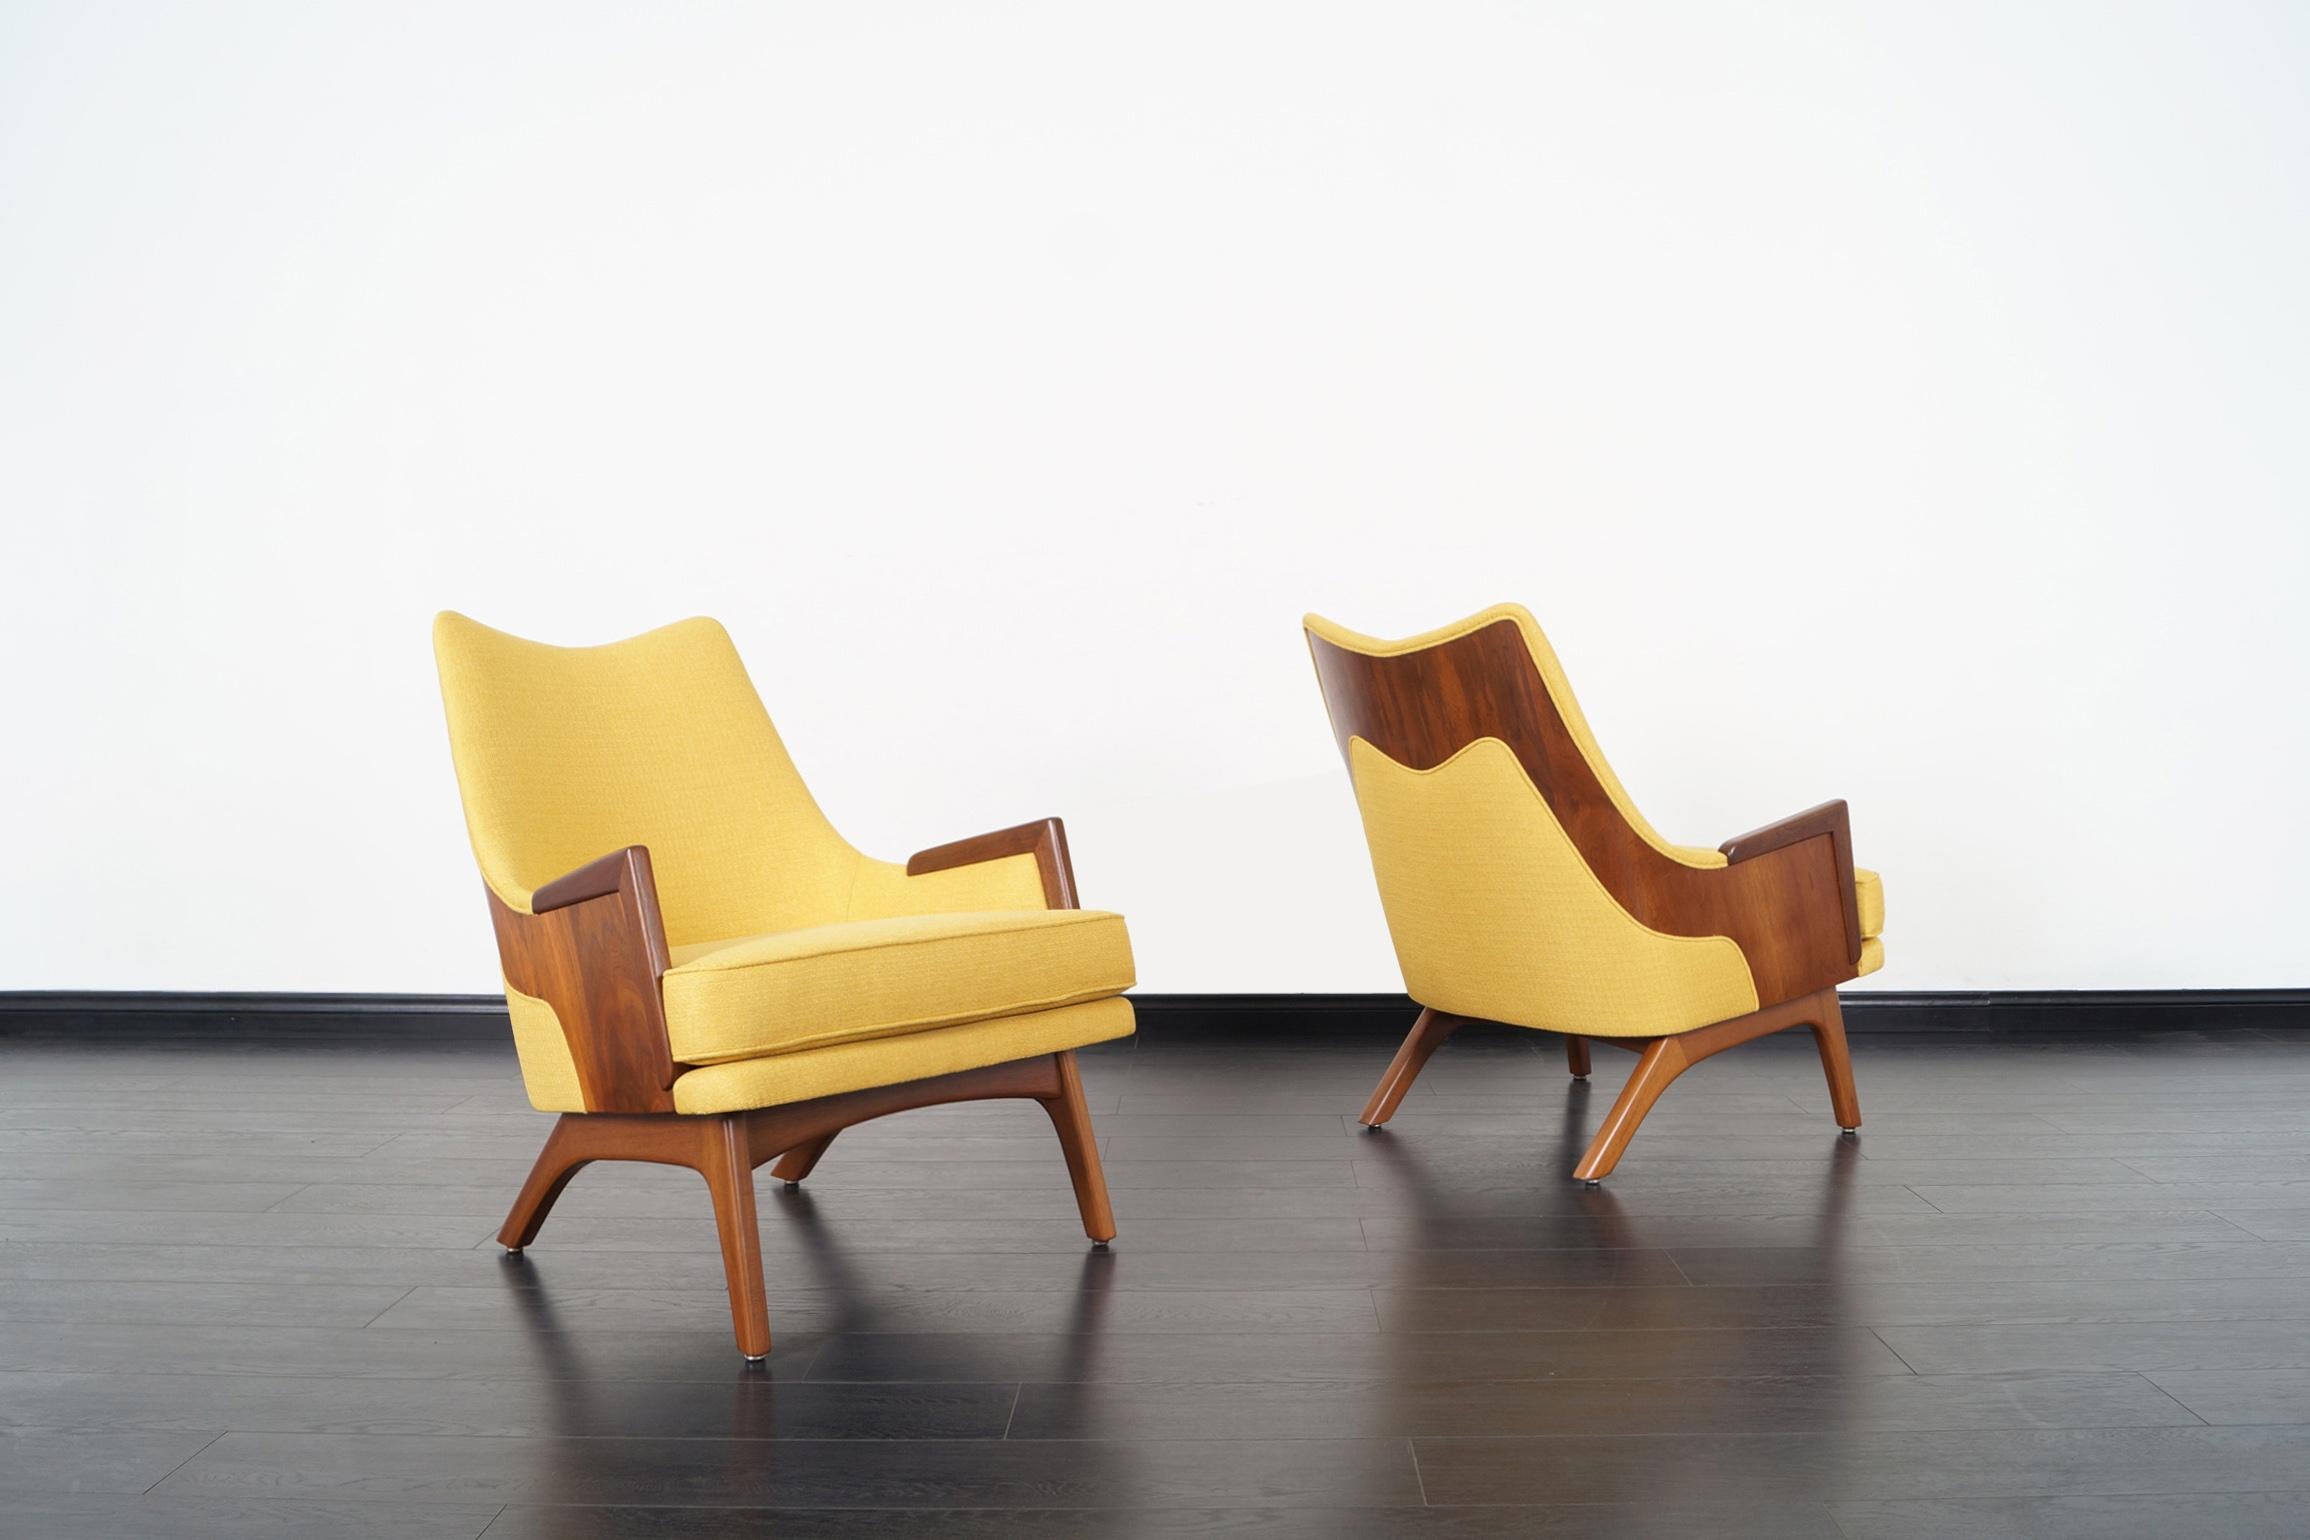 These exceptional rare walnut lounge chairs were designed by Adrian Pearsall for Craft Associates. These phenomenal chairs are simply amazing! Features a distinctive wrapped detail, where the walnut frame is exposed in a sculpted band across the